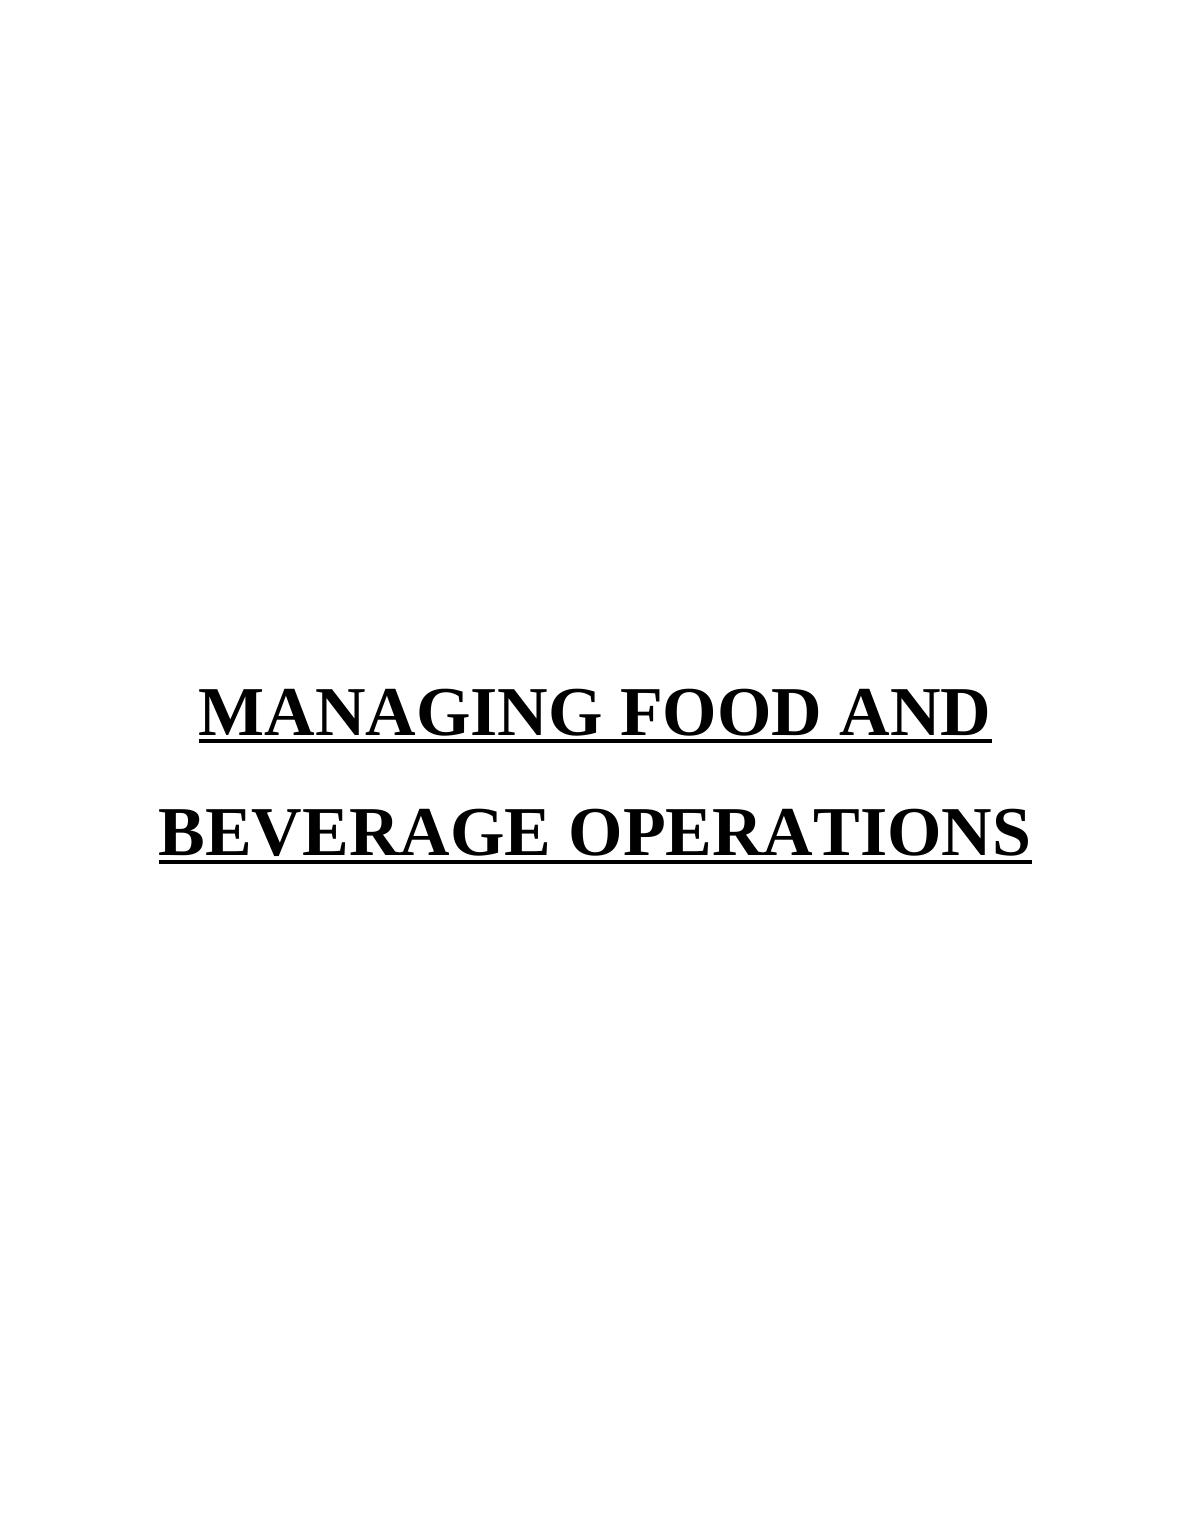 Managing Food and Beverage Operations Assignment - Doc_1